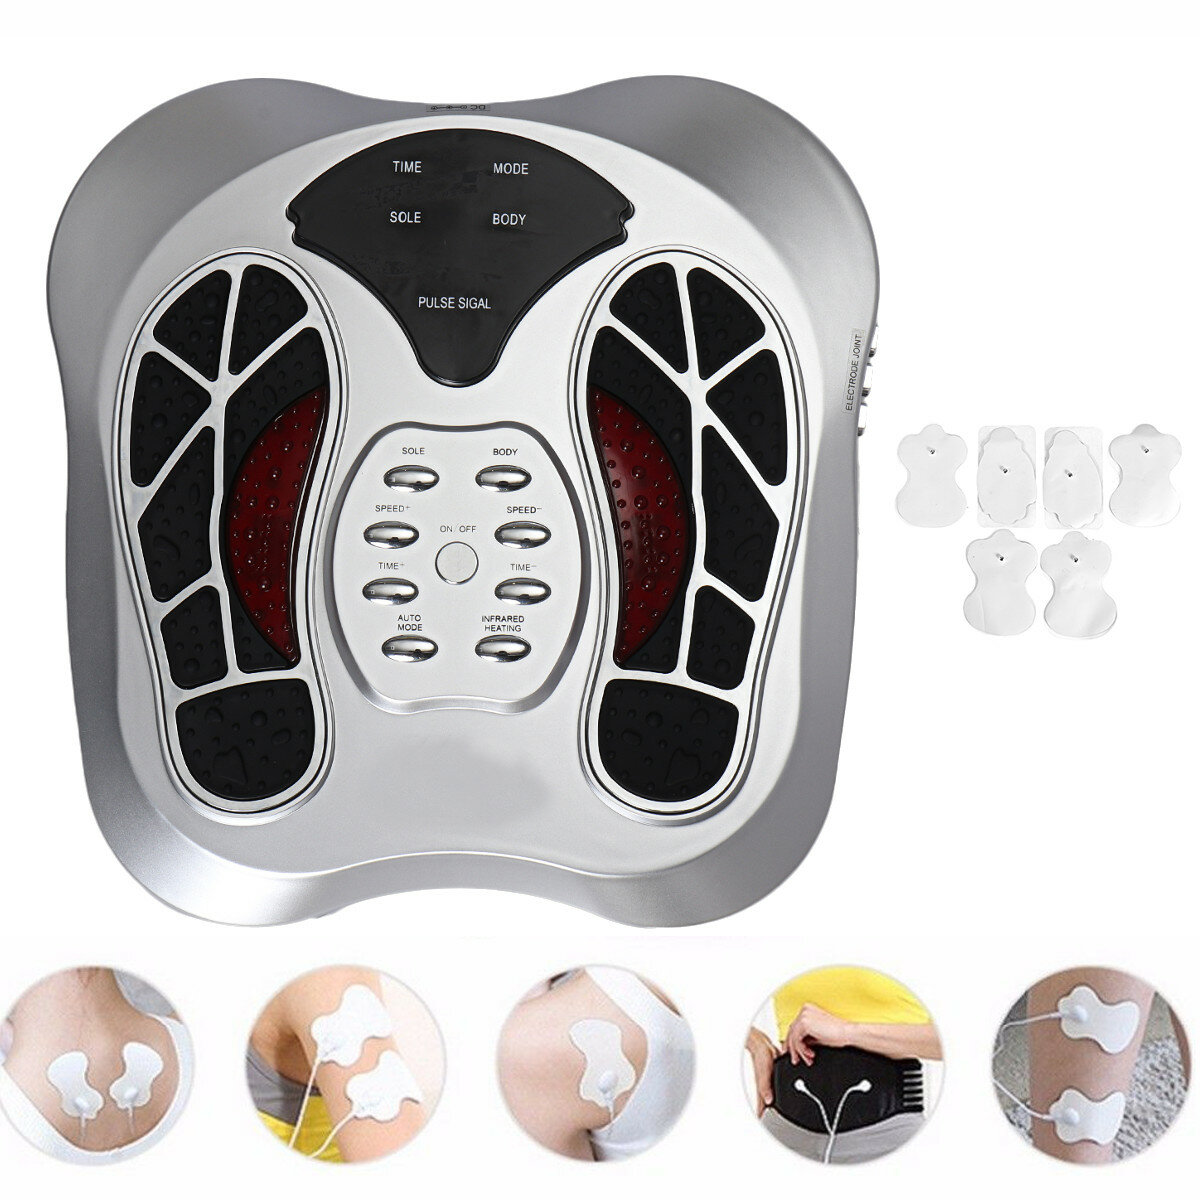 

Multifunction Electric Foot Leg Massager Machine Circulation Therapy Heater SPA Relaxing Muscle Pulse Massager